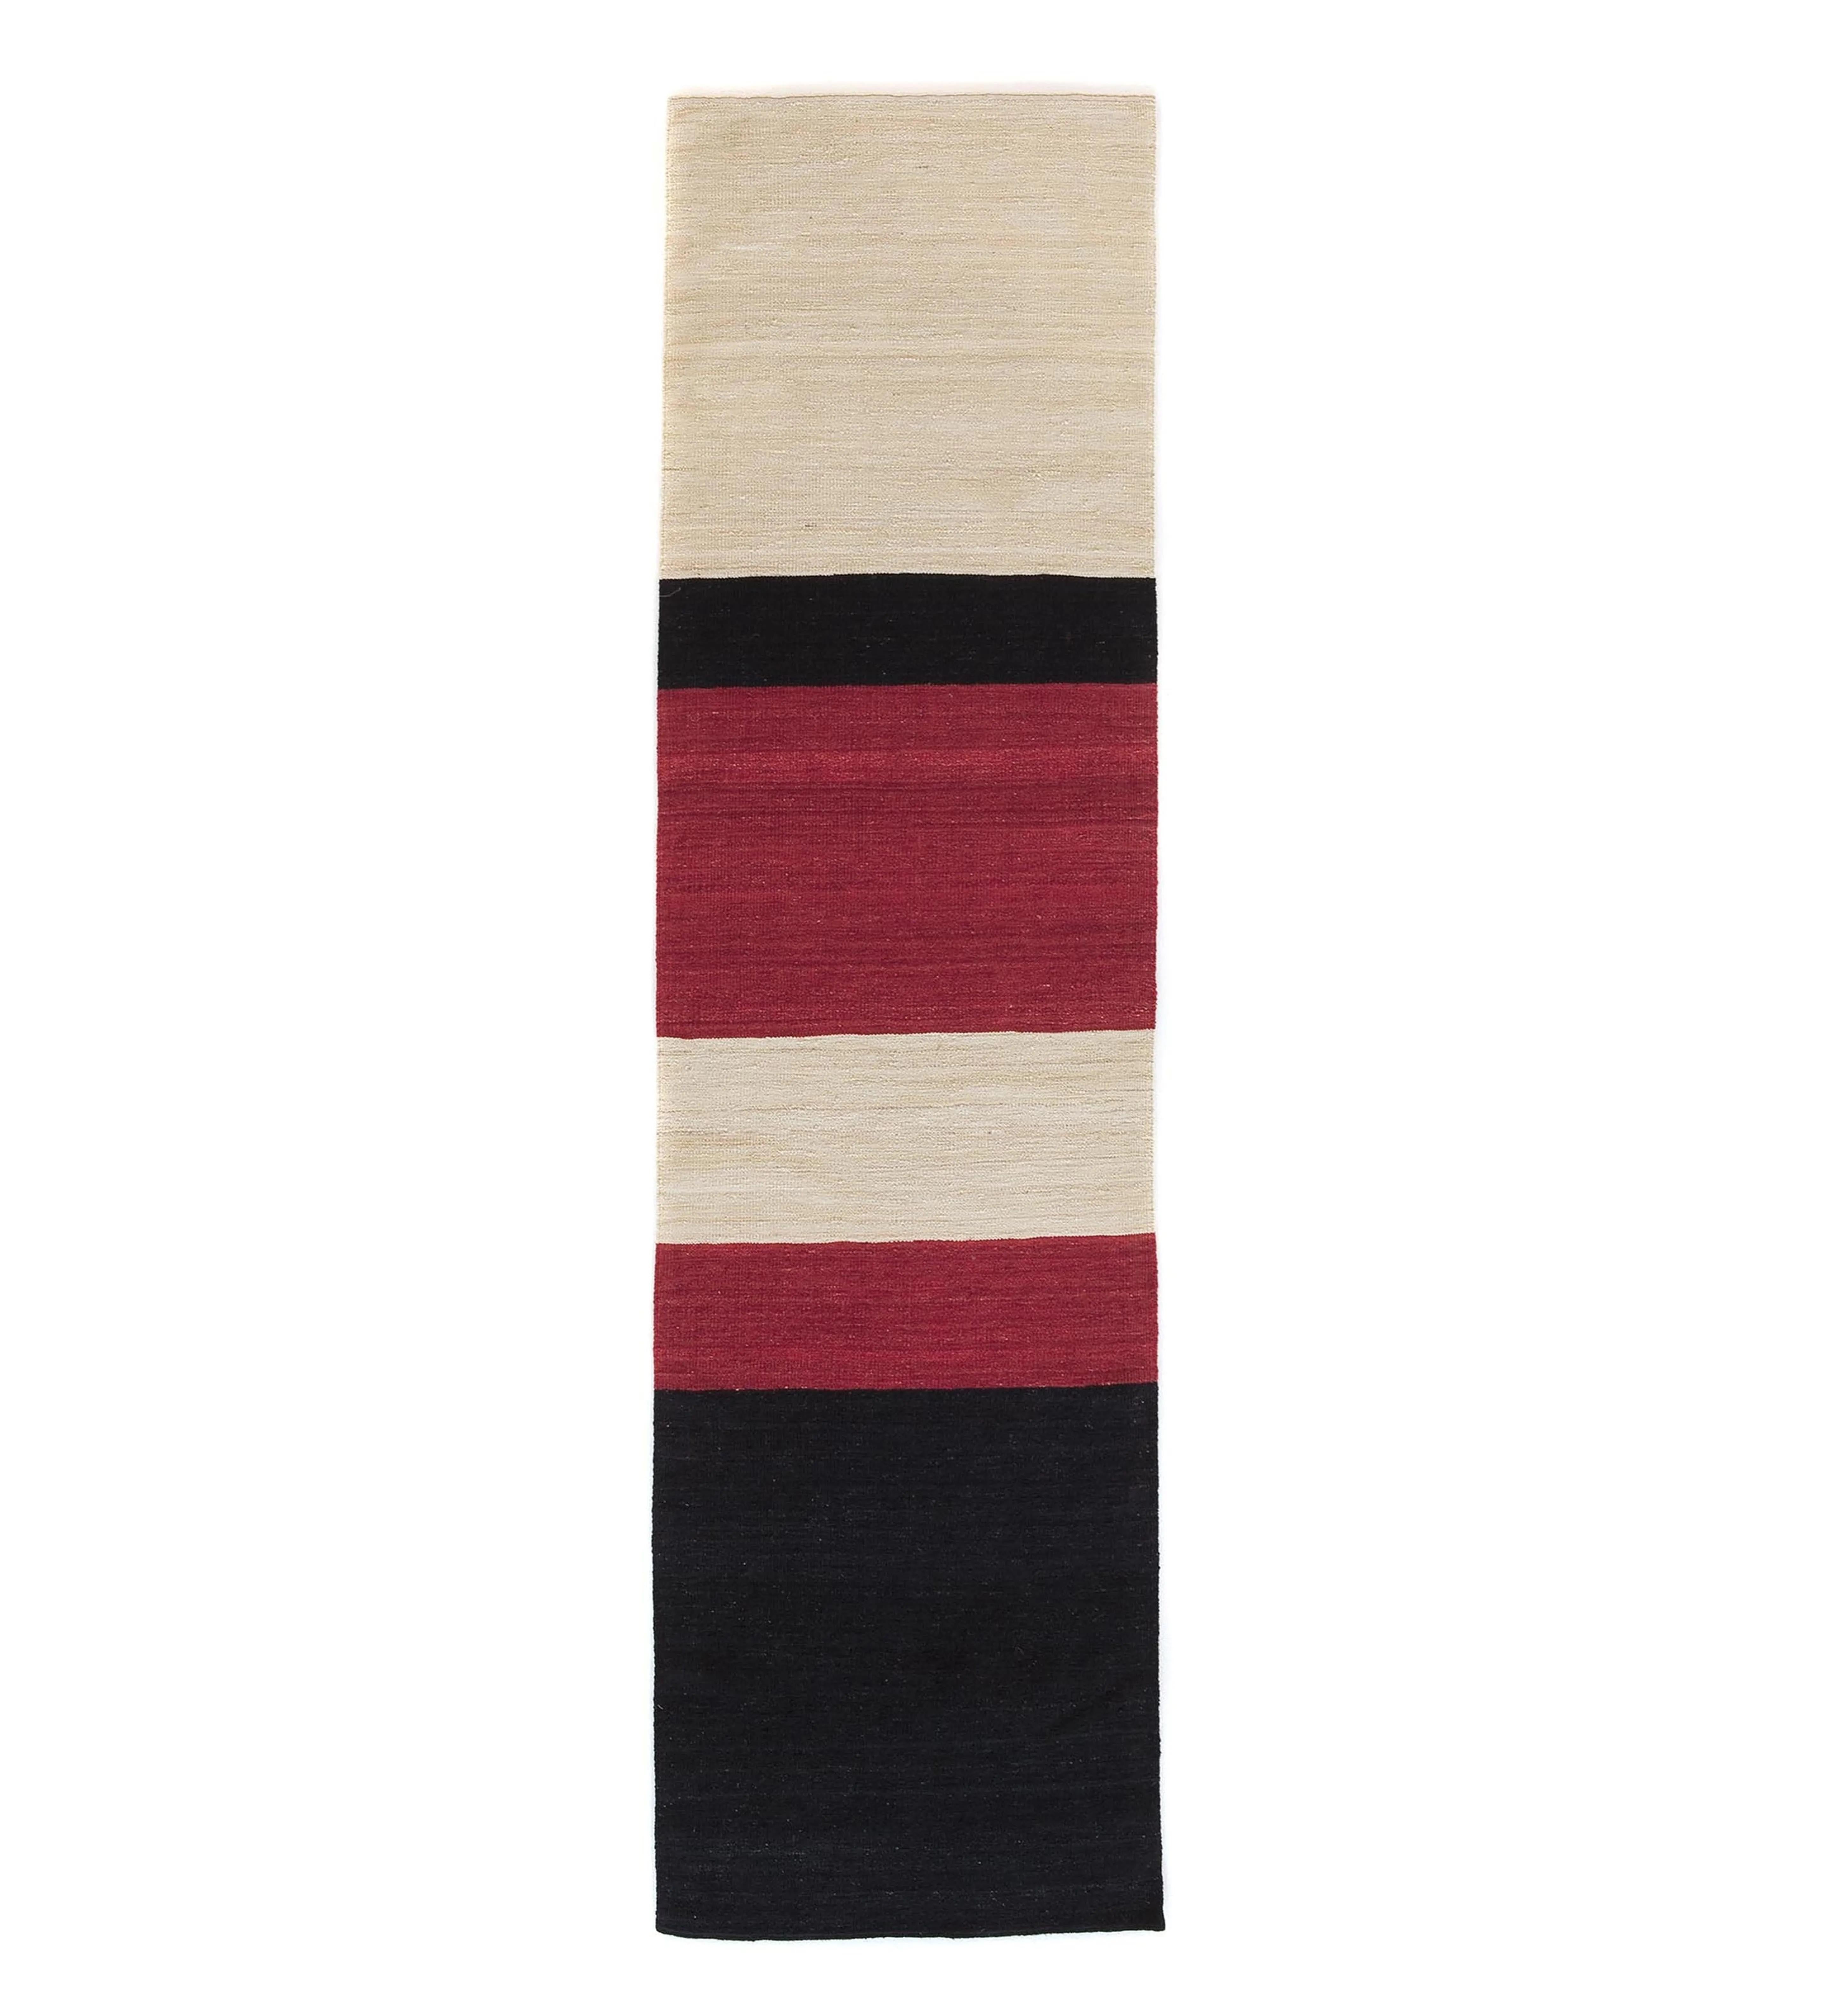 Large 'Mélange Color 1' Hand-Loomed Rug by Sybilla for Nanimarquina For Sale 2